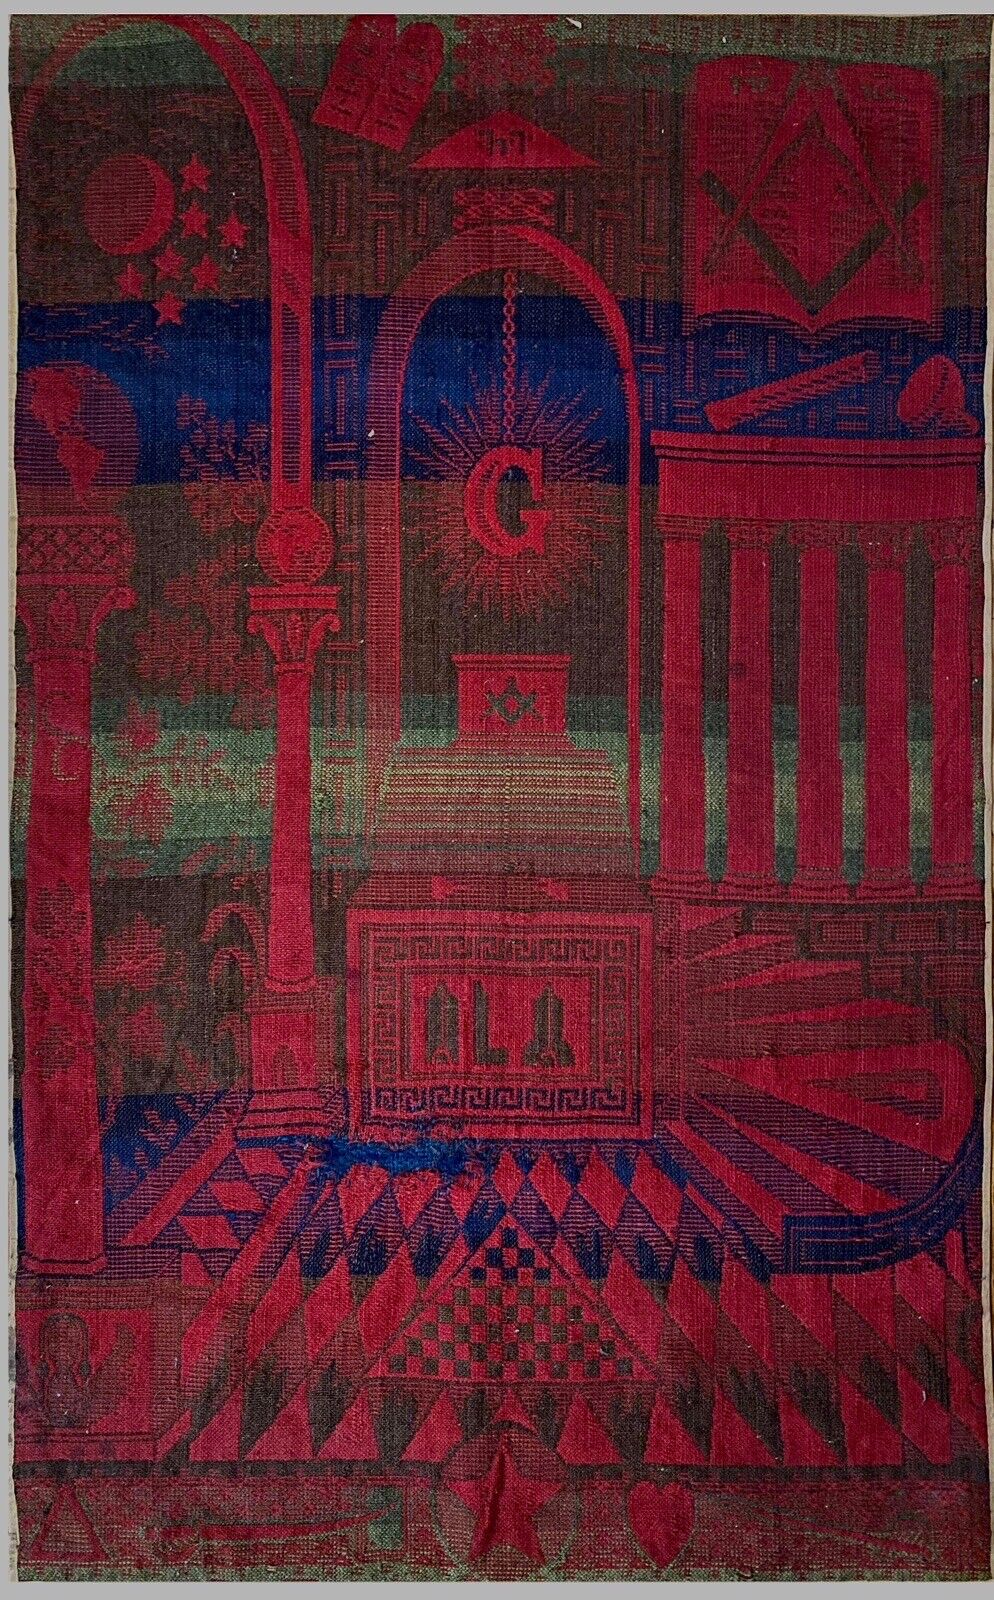 Masonic tapestry from late 19th Century